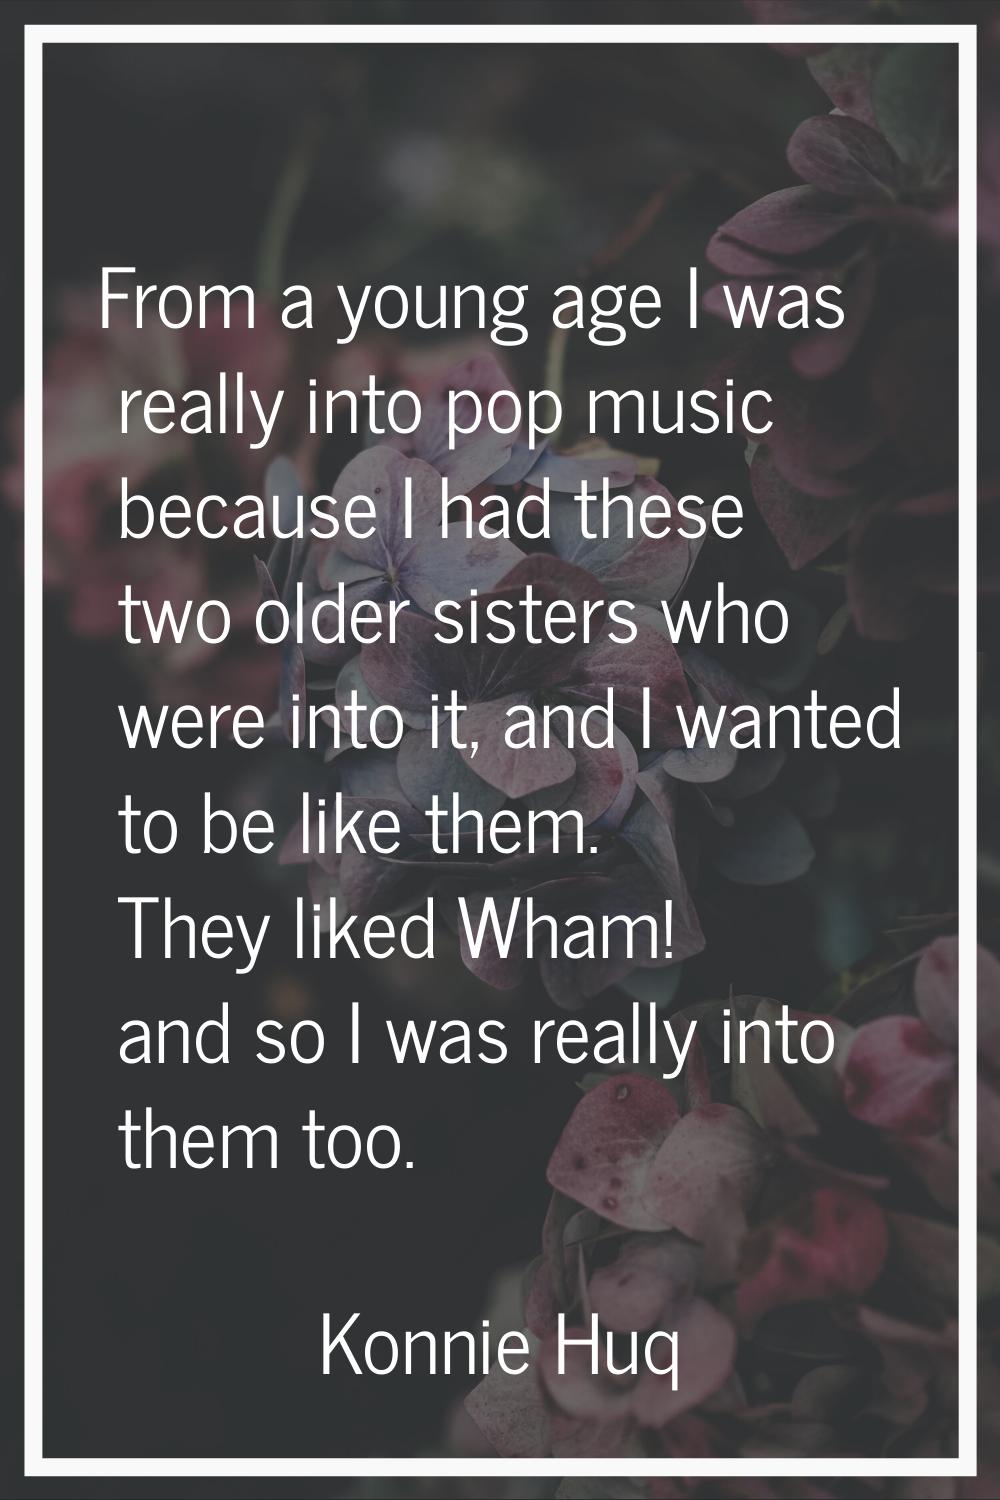 From a young age I was really into pop music because I had these two older sisters who were into it